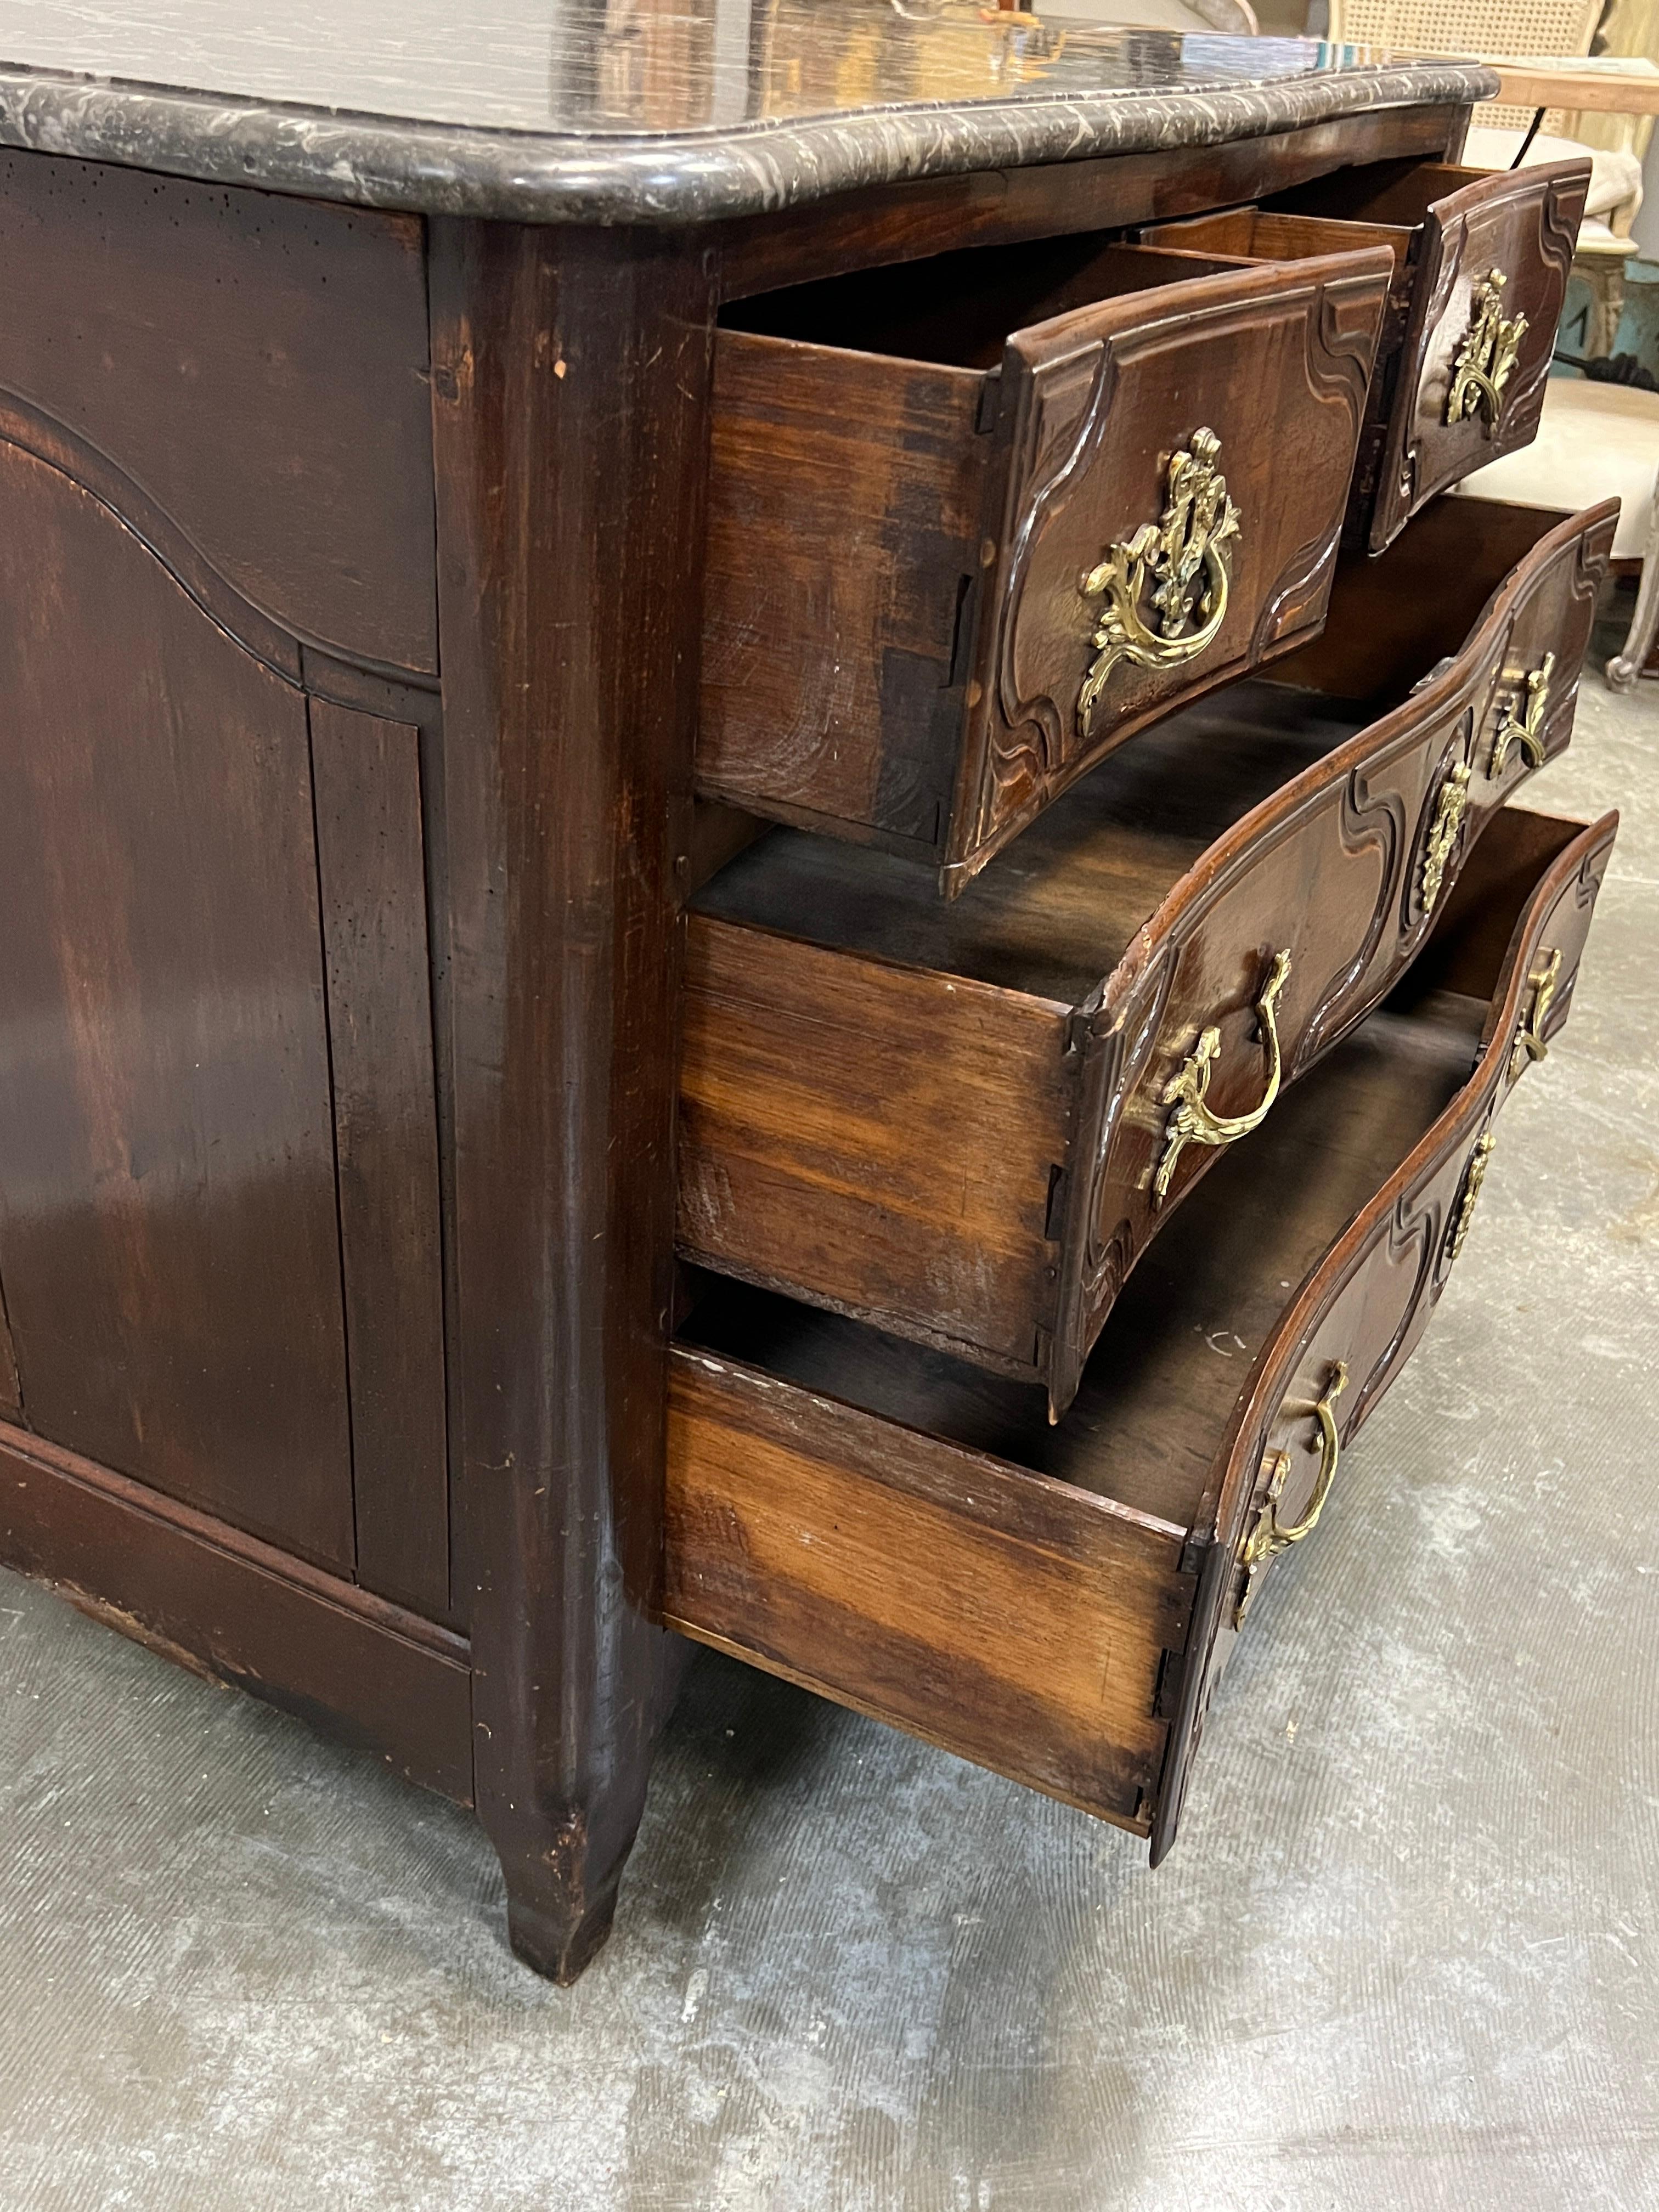 Classic Louis XV French commode of provincial style with two top drawers over two bottom drawers. The drawers are decorated with carved, lozenge shaped decoration and have hardware which appear original. The marble top is original and is black with